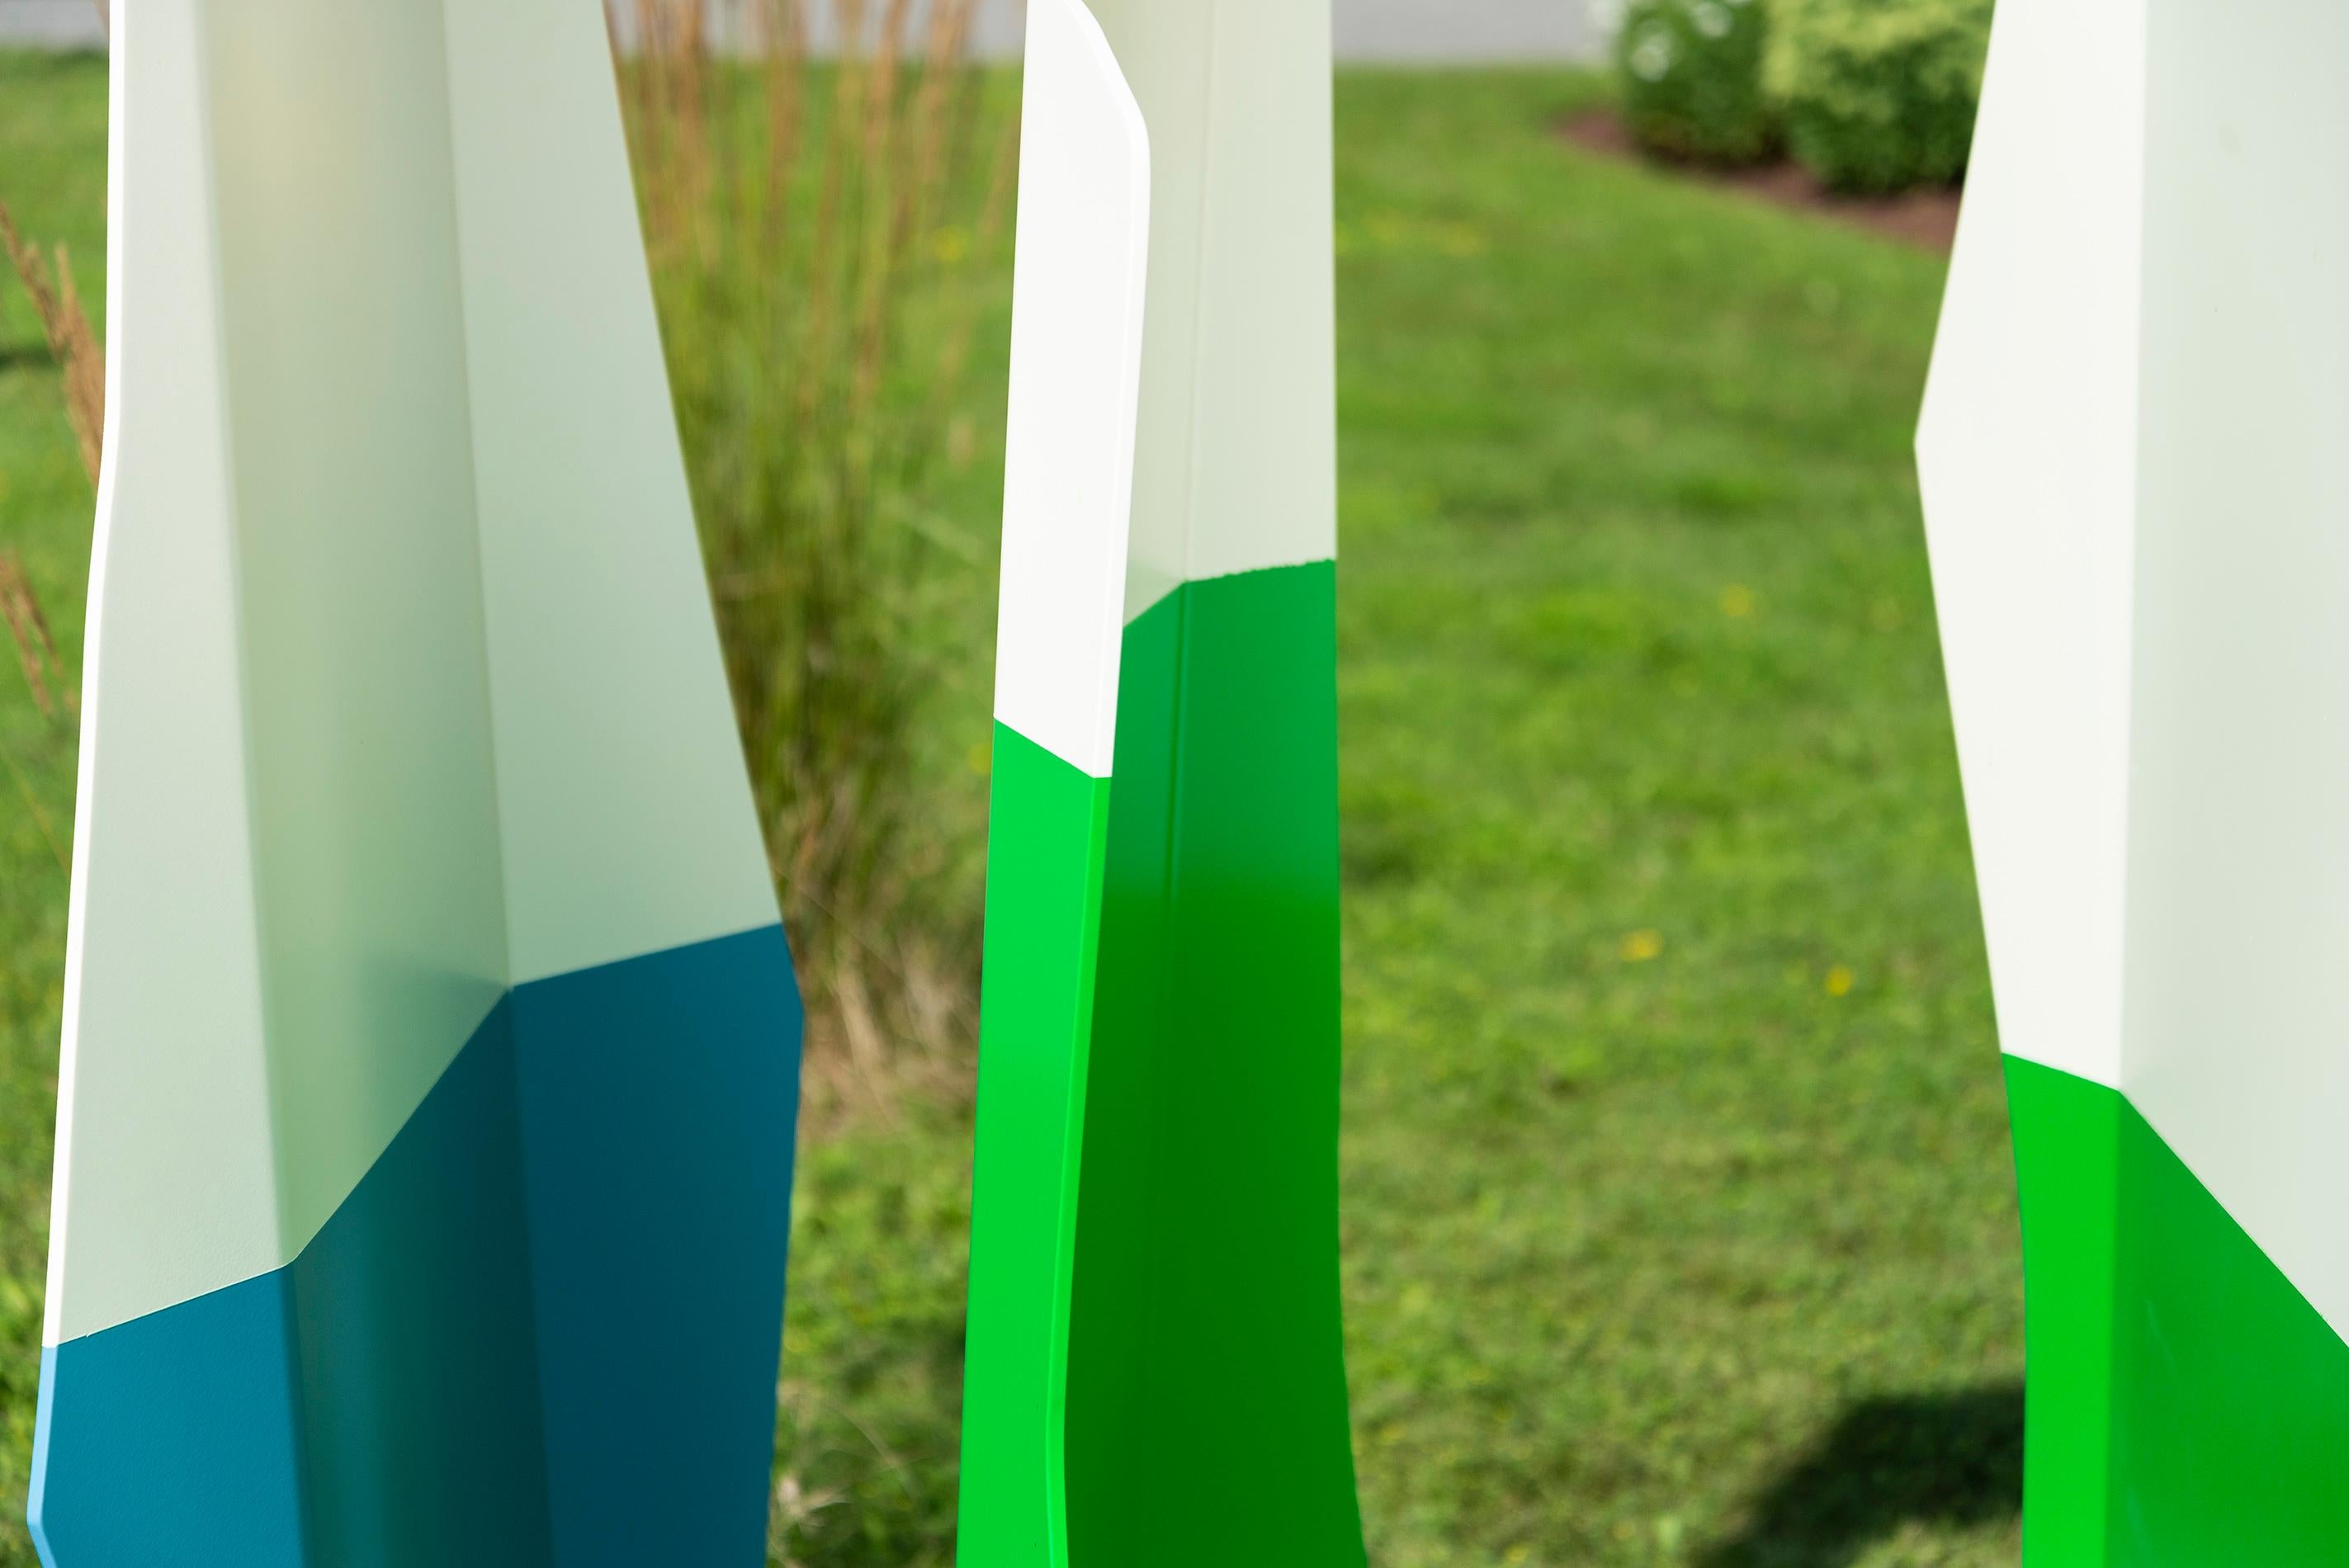 Parallax Series - Occluder - large, minimalist, powder coated steel sculpture - Contemporary Sculpture by Rocco Turino